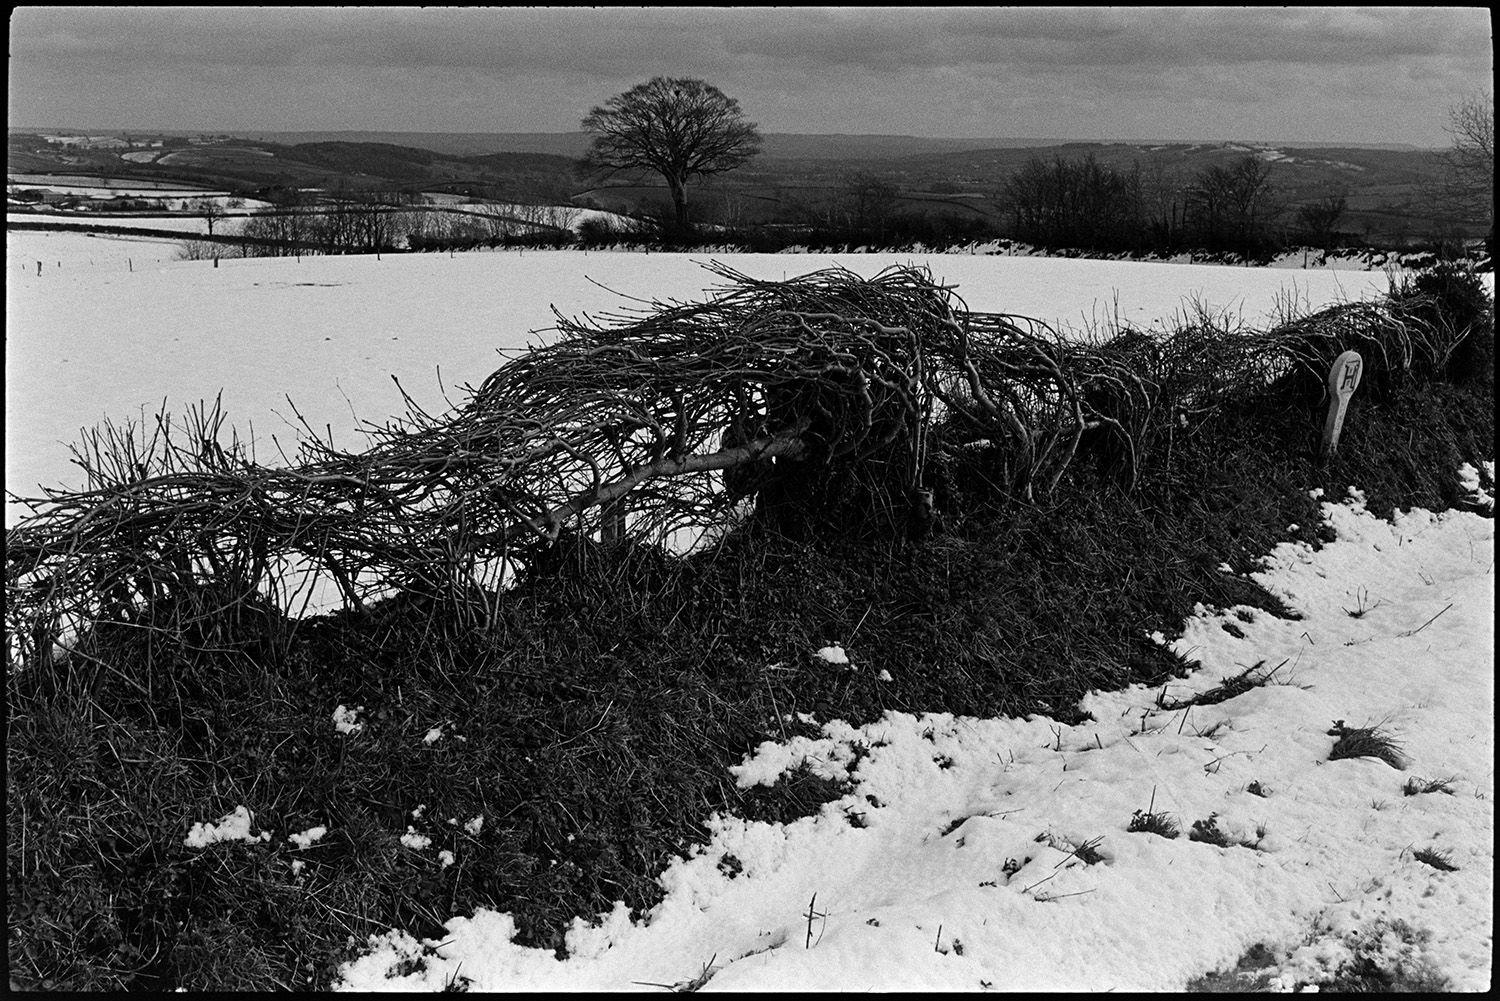 Snow, hedge laid like basket against snowy fields. 
[A laid hedge surrounded by a landscape of snow covered fields and trees near Knowstone, Exmoor.]